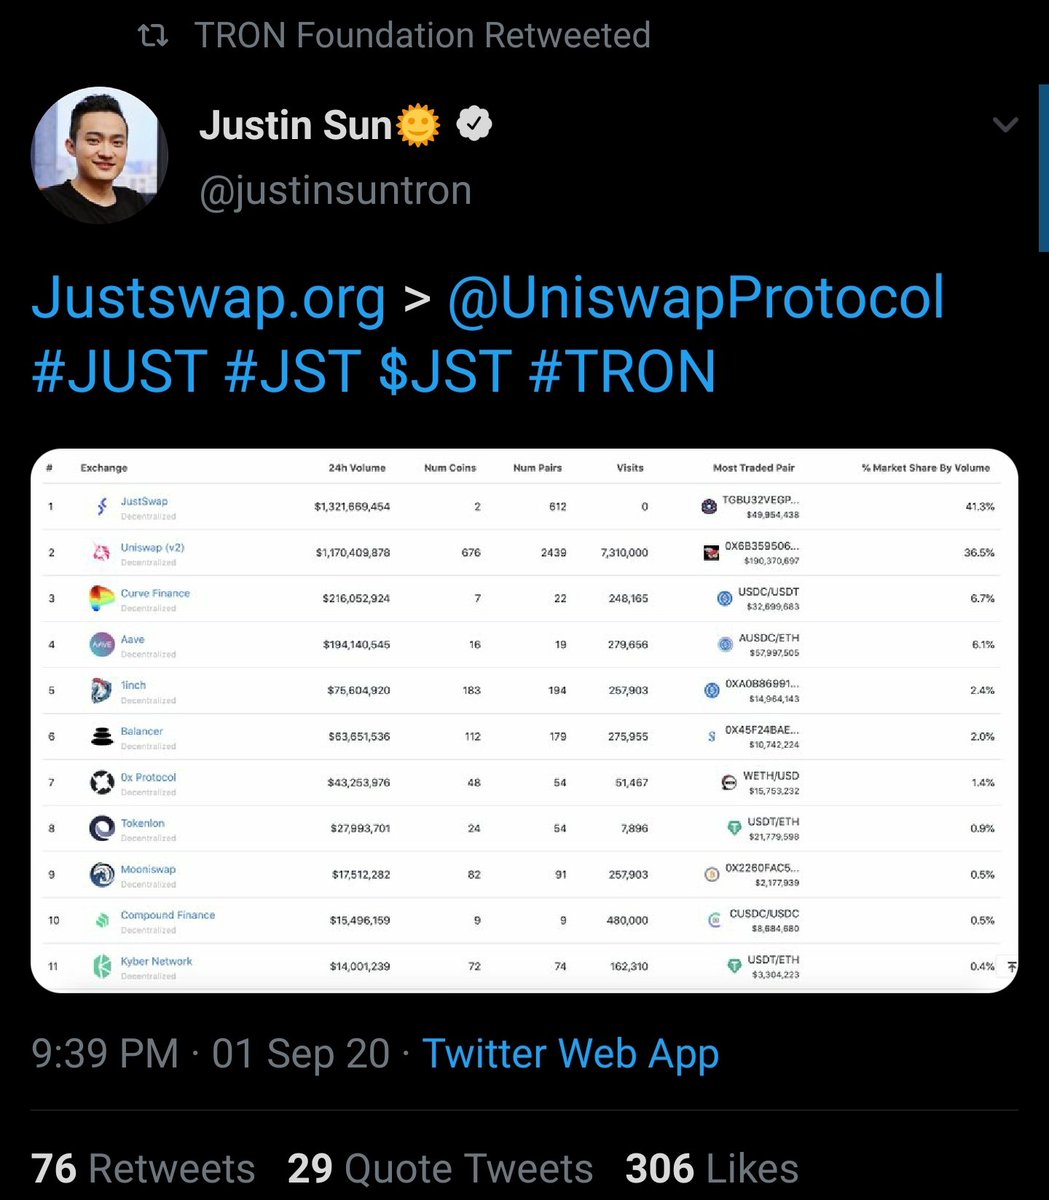 The same  $TRON that plagiarized their whitepaper and shamelessly copy/paste dApps and push false information about its adoptionThe very same  $BAND that copy/pasted Chainlink VRF and then (unsuccessfully) tried to cover it upBad actors stick together https://twitter.com/GreenSockMonkey/status/1300628250759233537?s=19